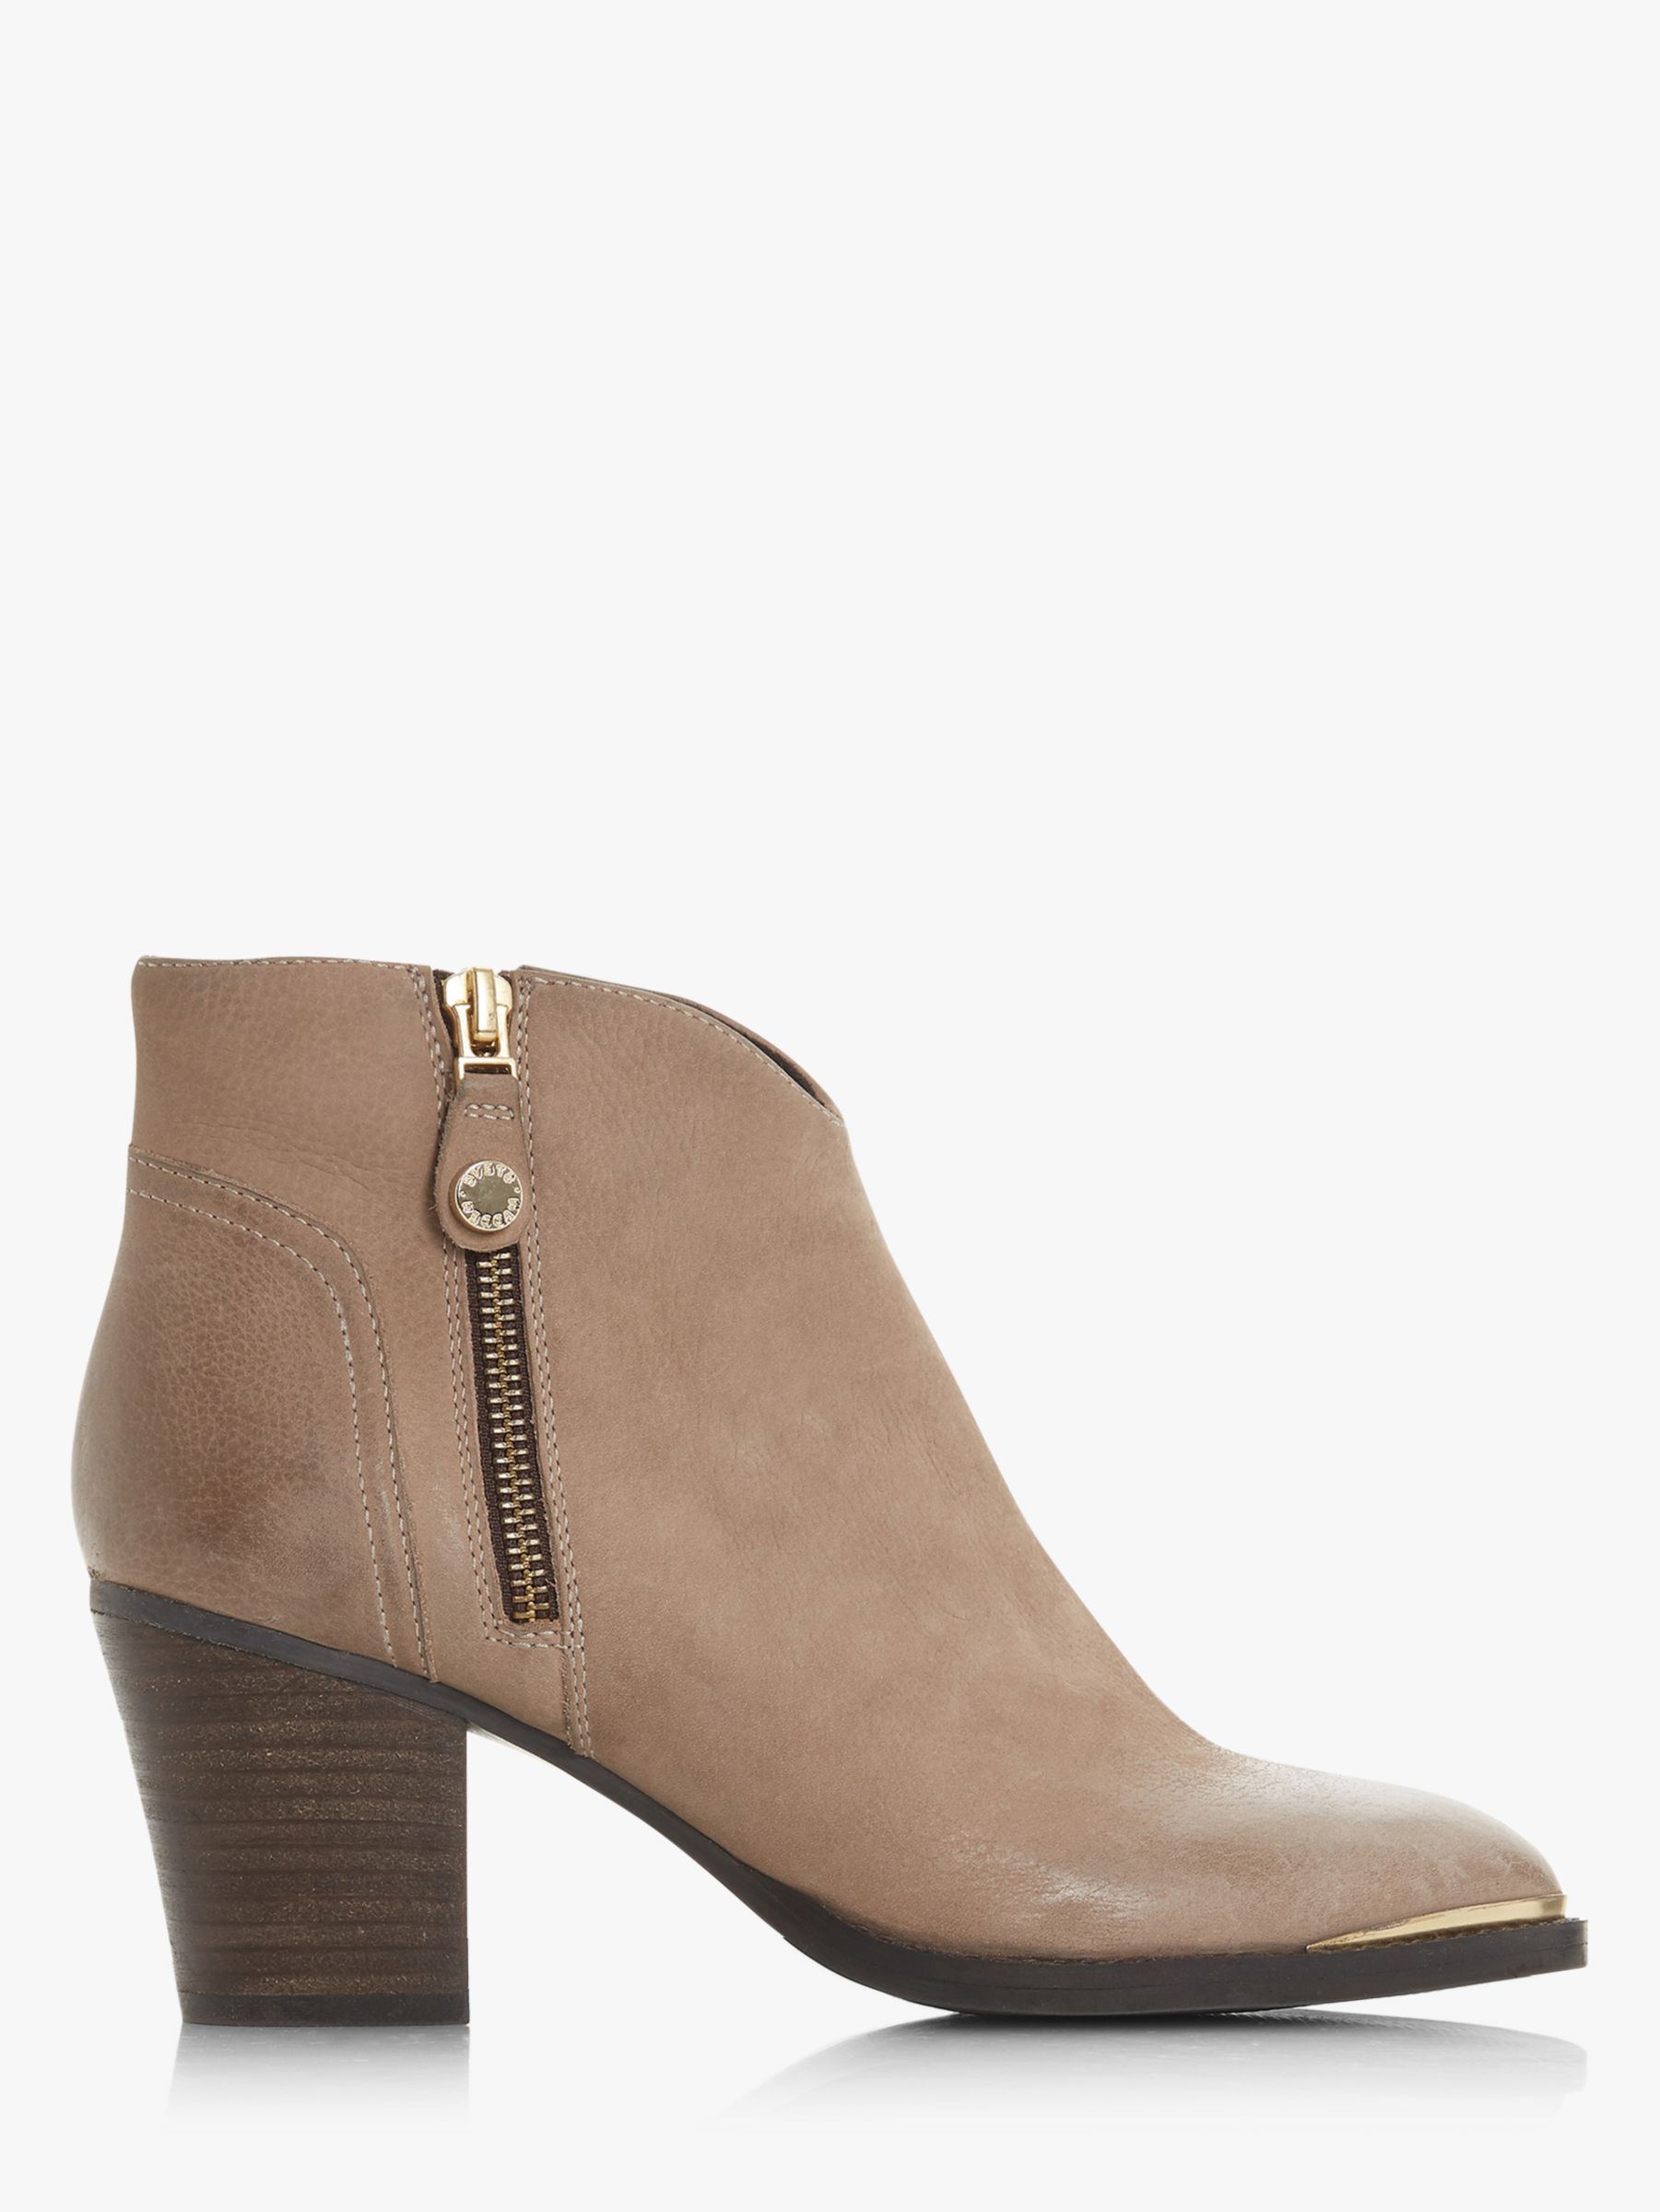 Steve Madden Francy Ankle Boots, Taupe Leather